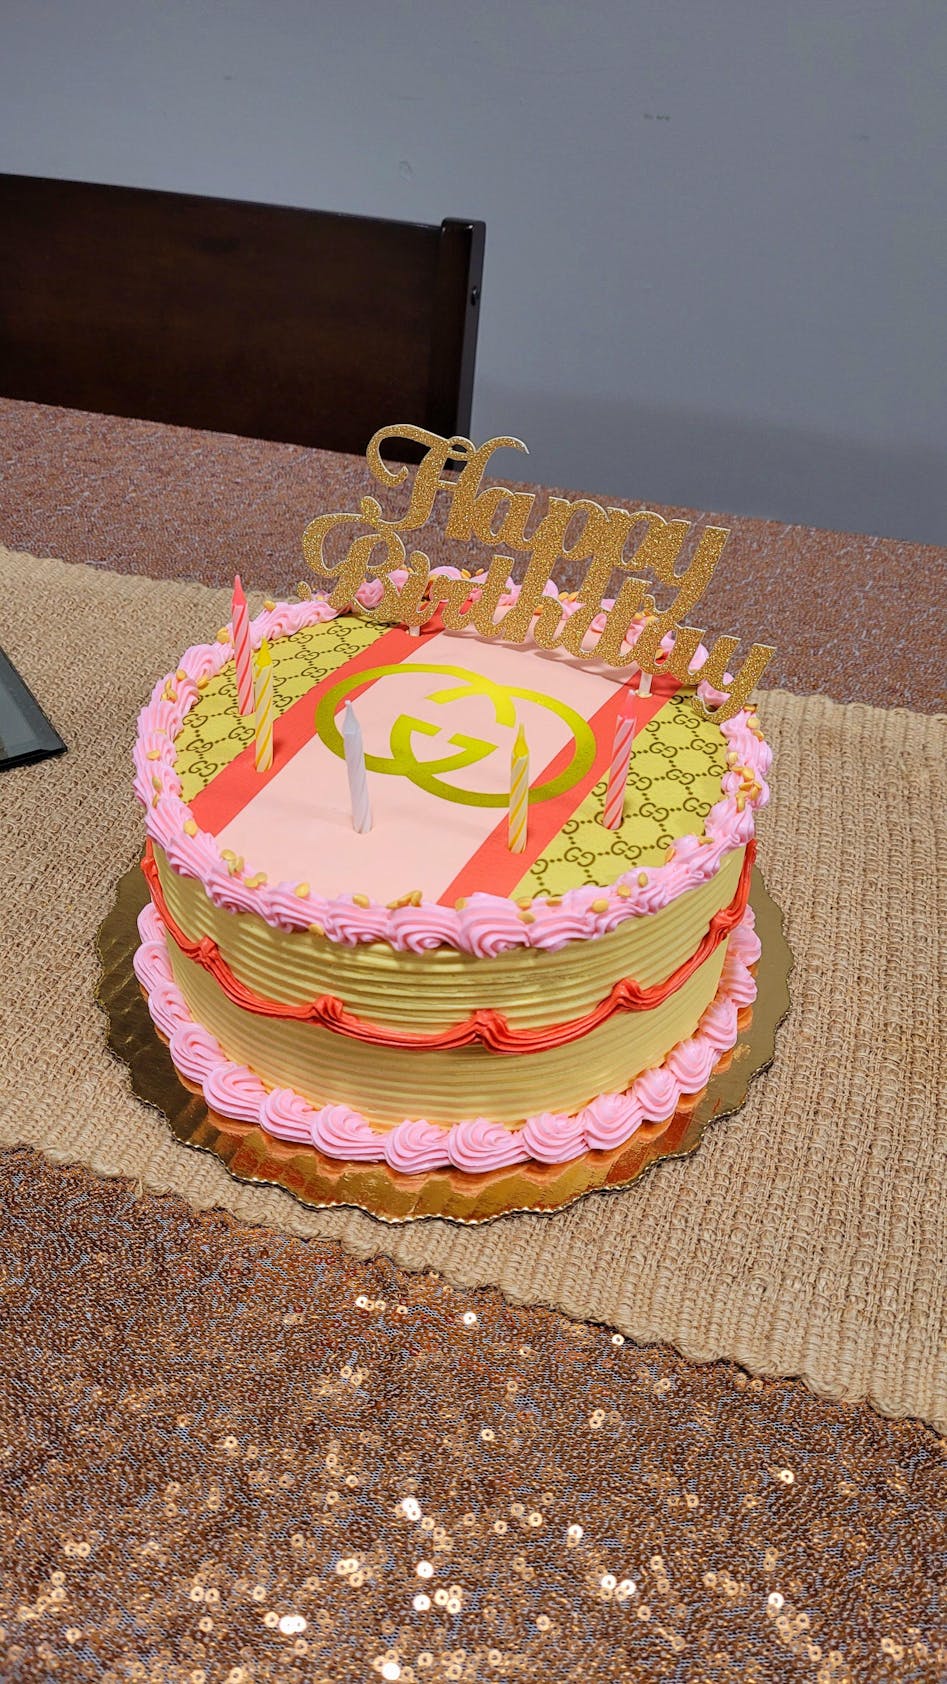 Ediblecakeimage Louis Vuitton Gray Brown OG Fashion Edible Cake Toppers Digital File (Emailed No Physical Item Shipped) / Digital File (Standard Size)